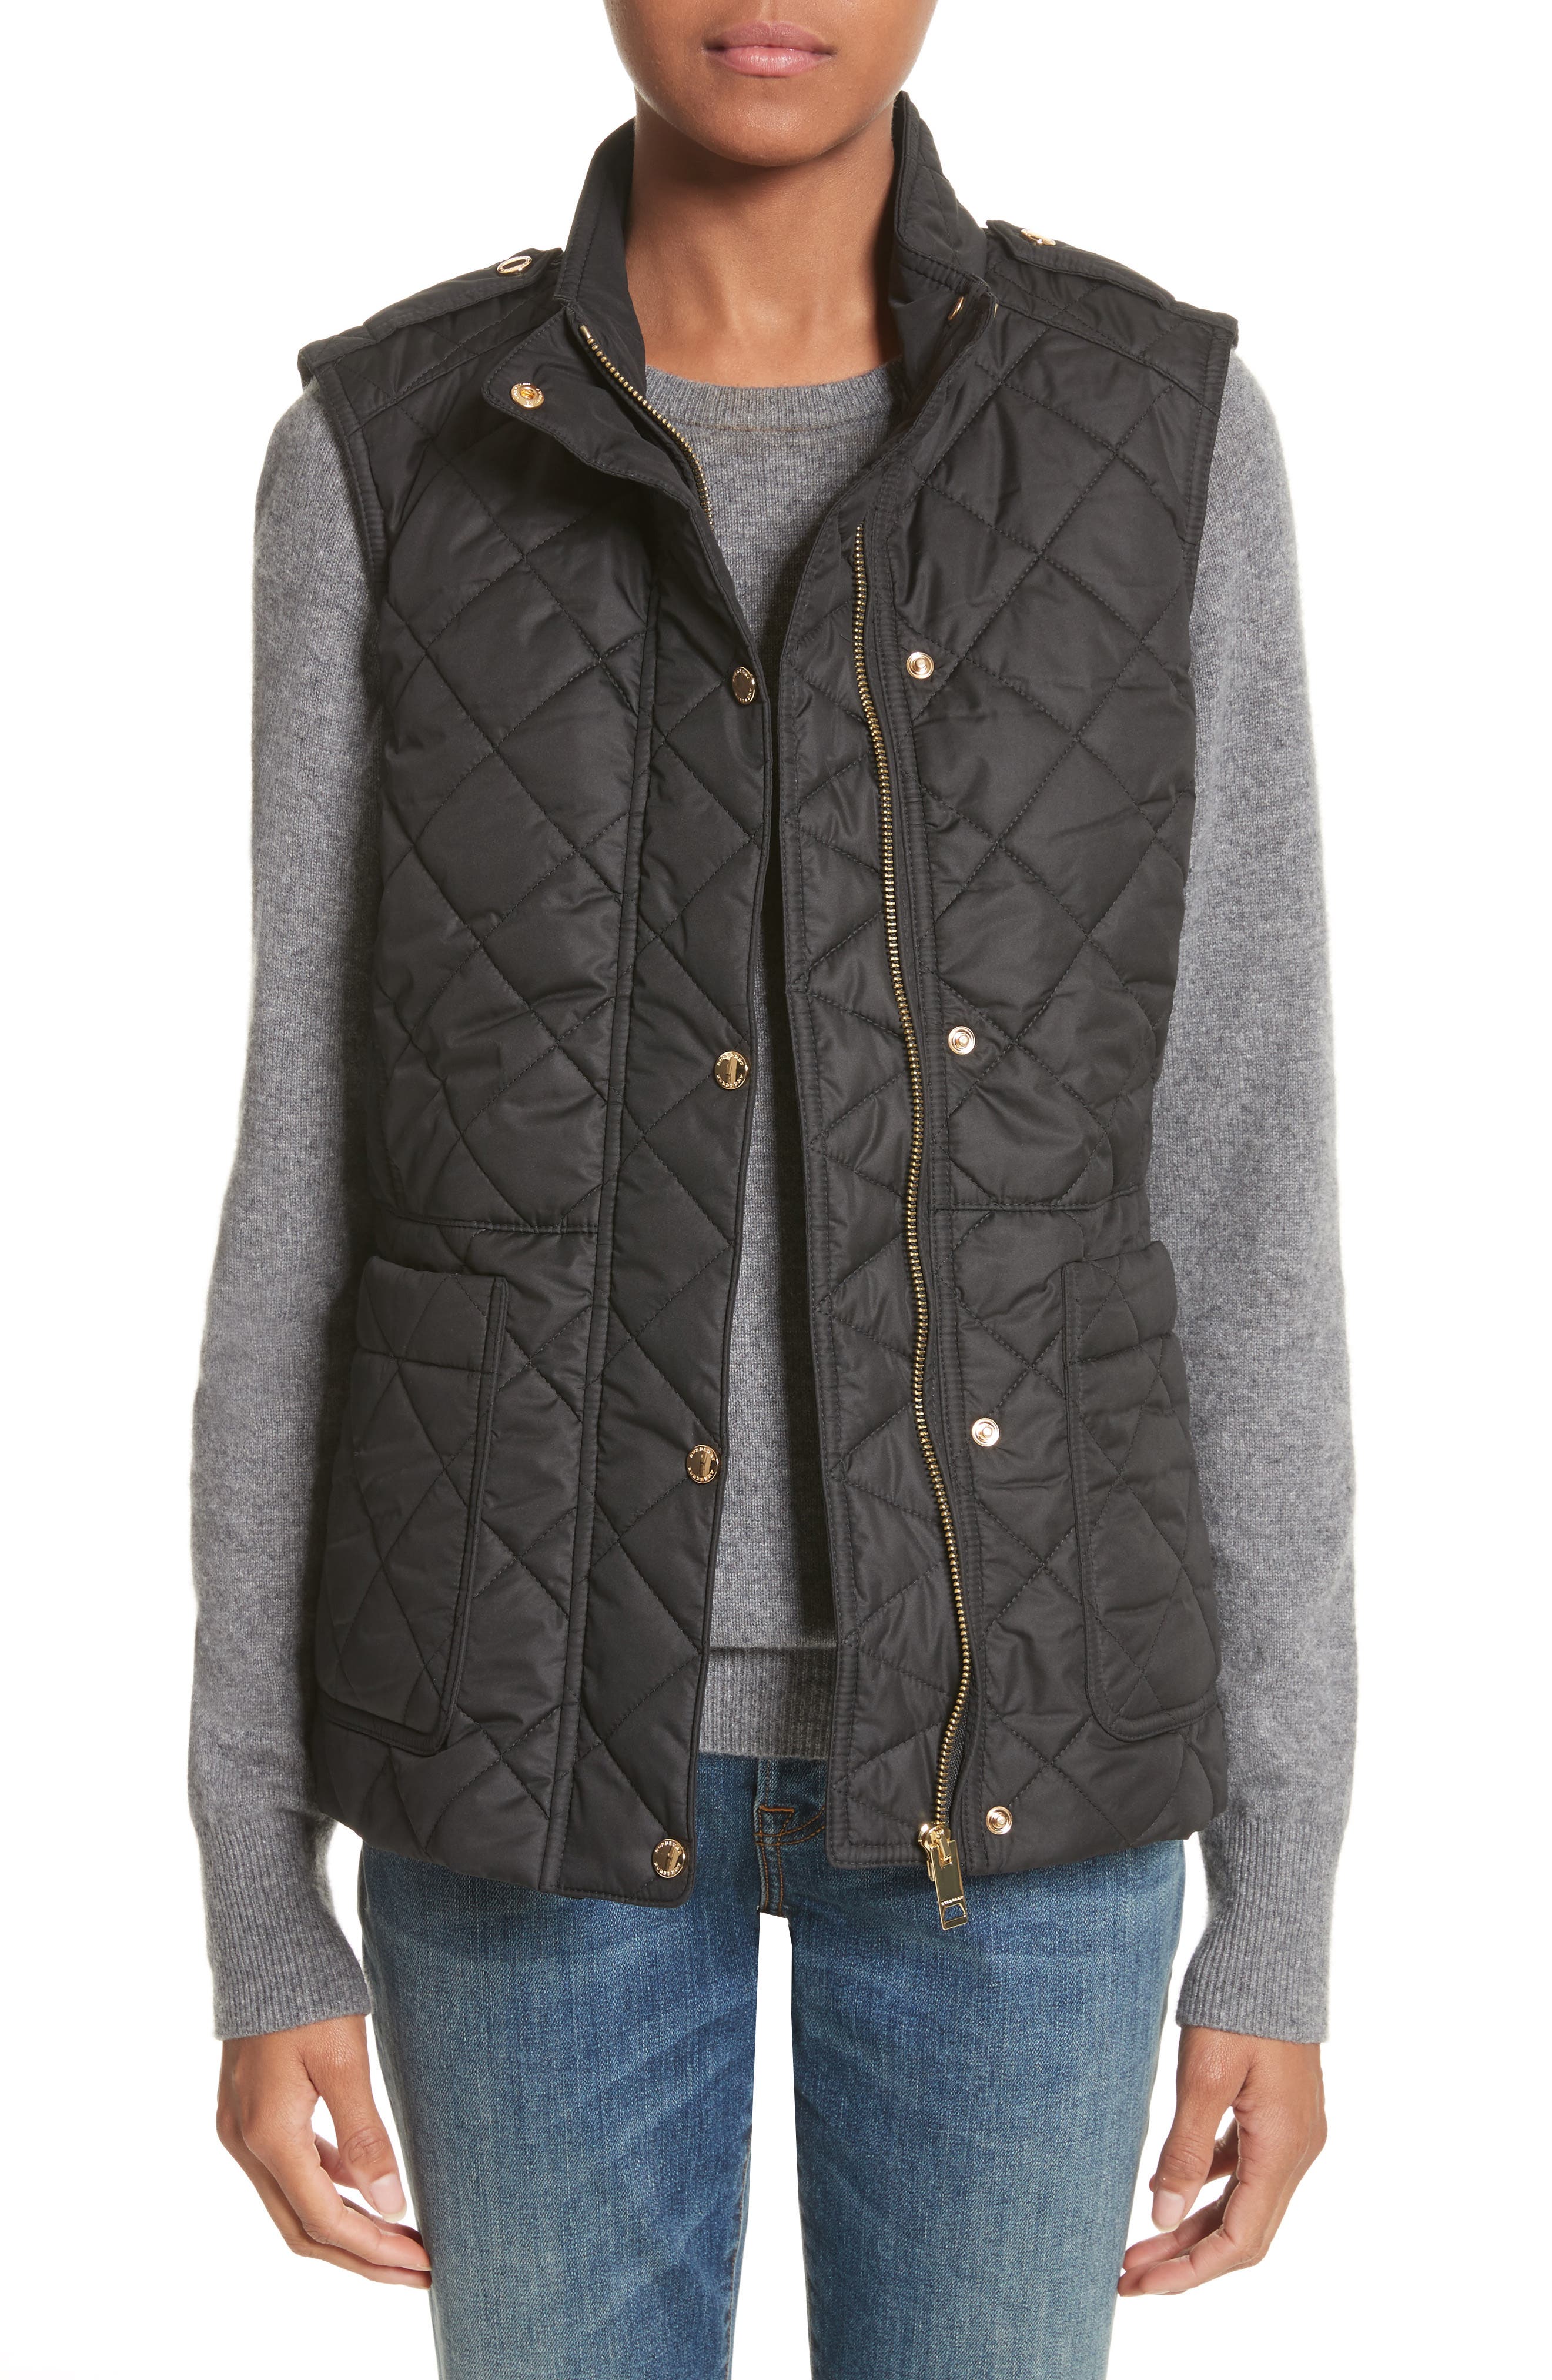 burberry quilted vest